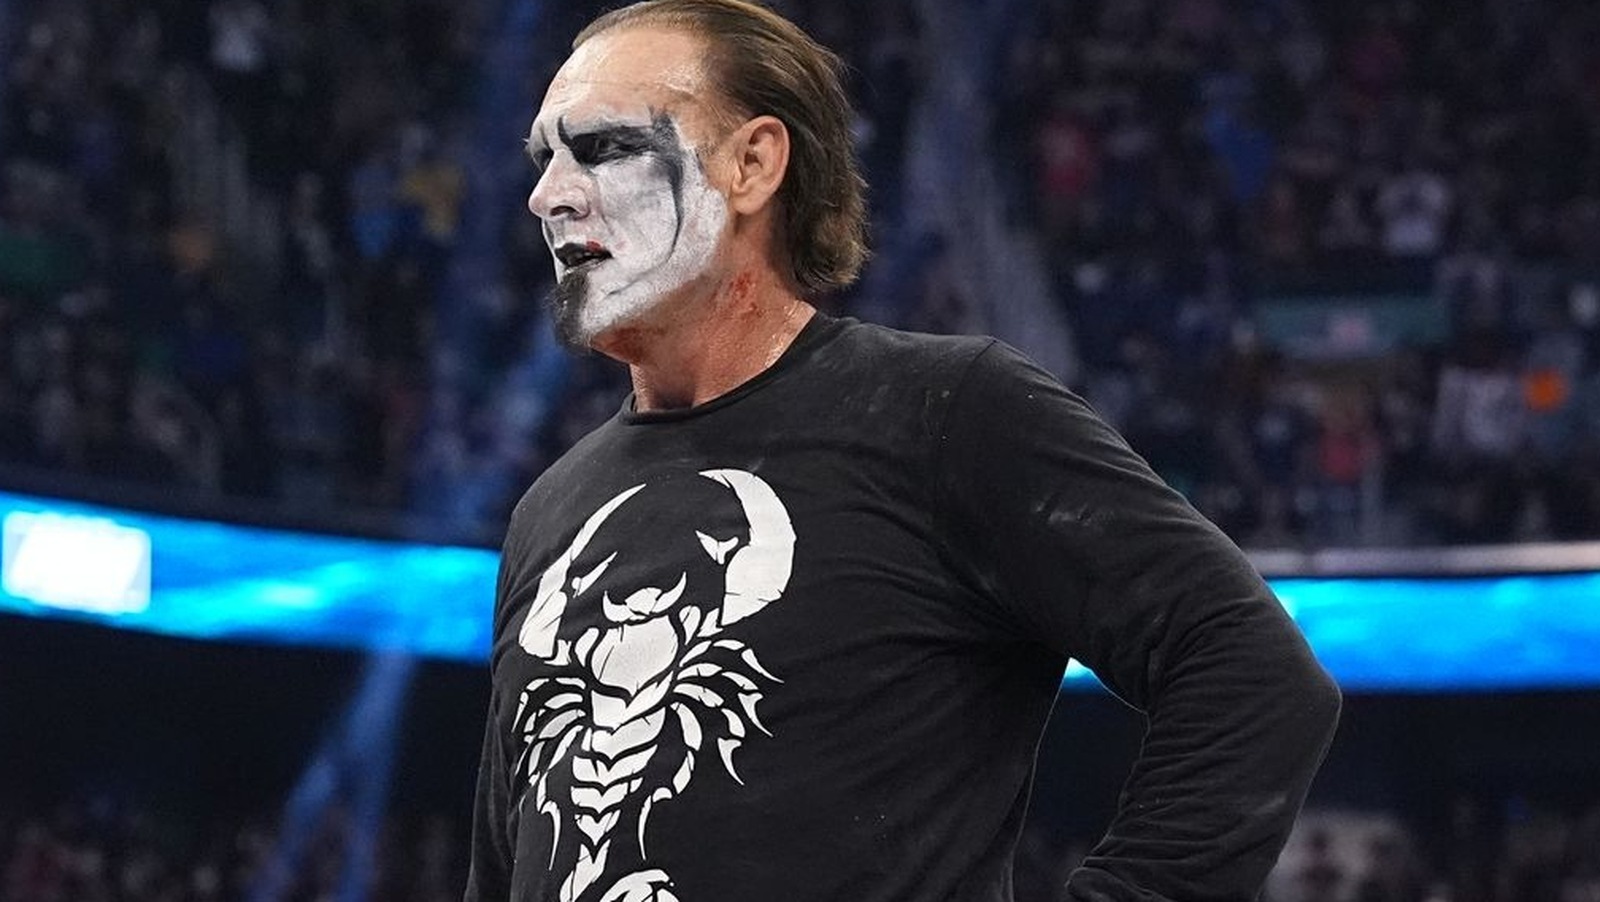 Sting receives boos from Michael Cole on WWE Raw after his AEW Revolution retirement